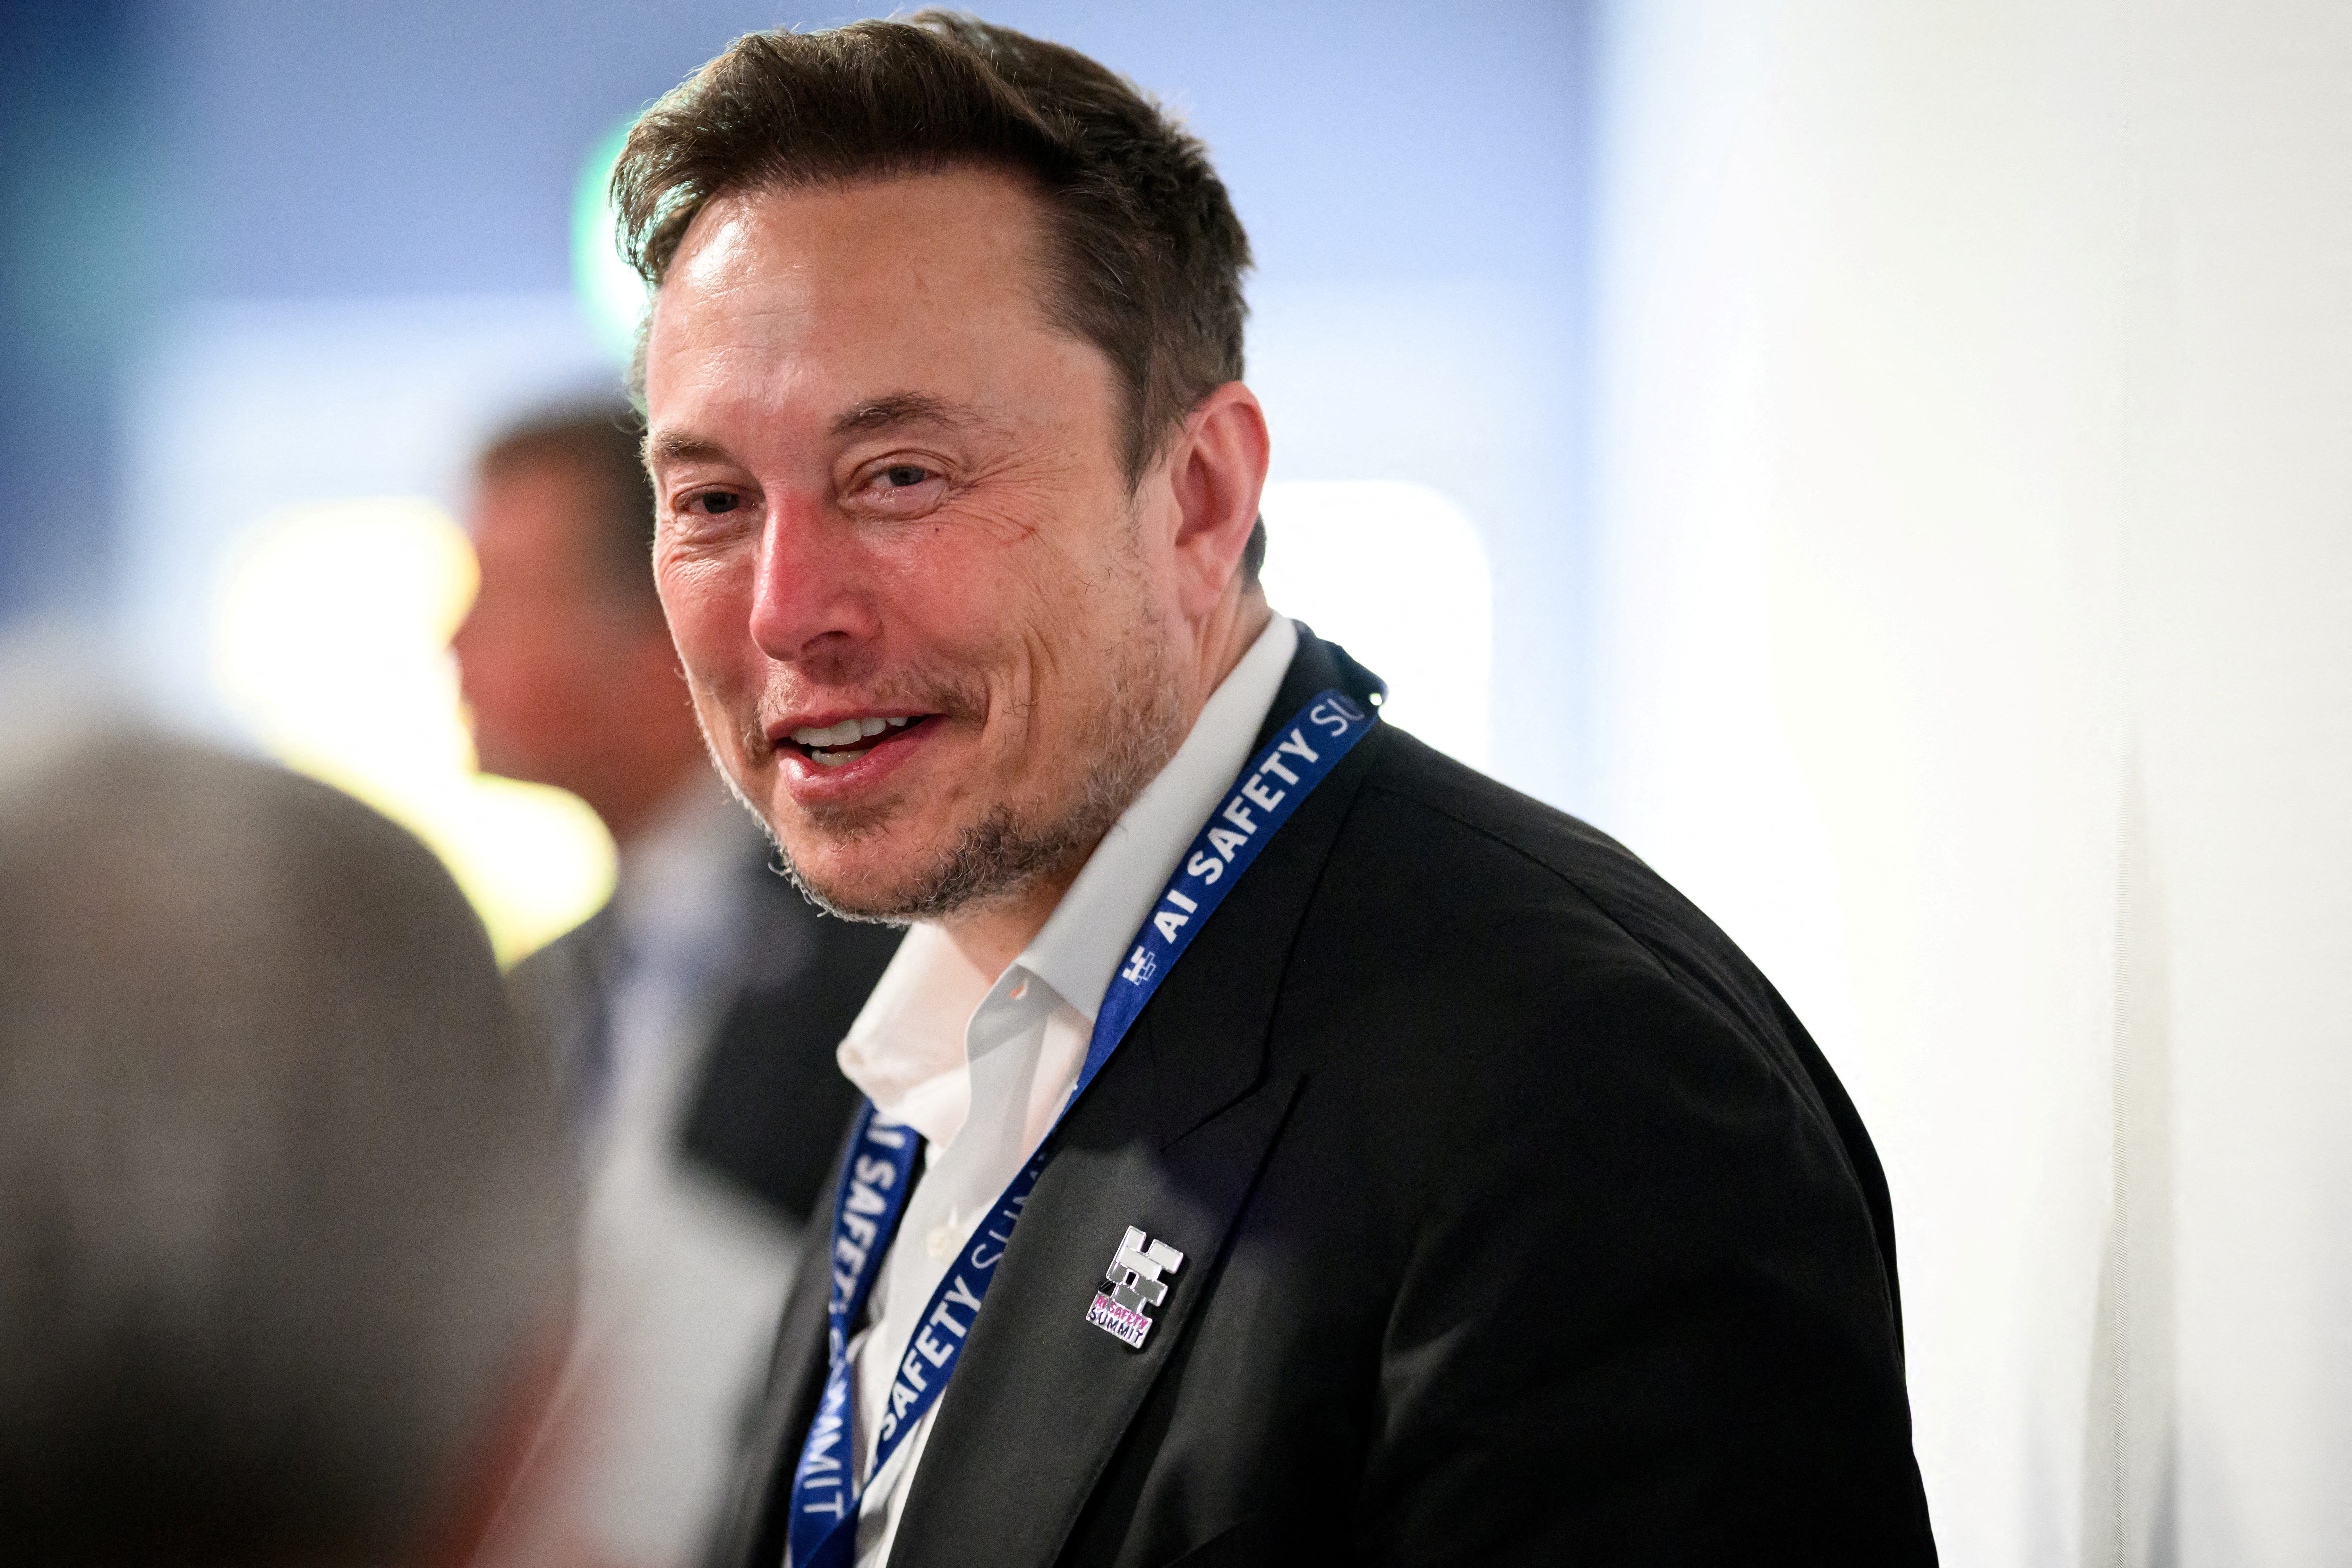 Is Elon Musk speaking at the RNC tonight? Rumors swirl online, at convention